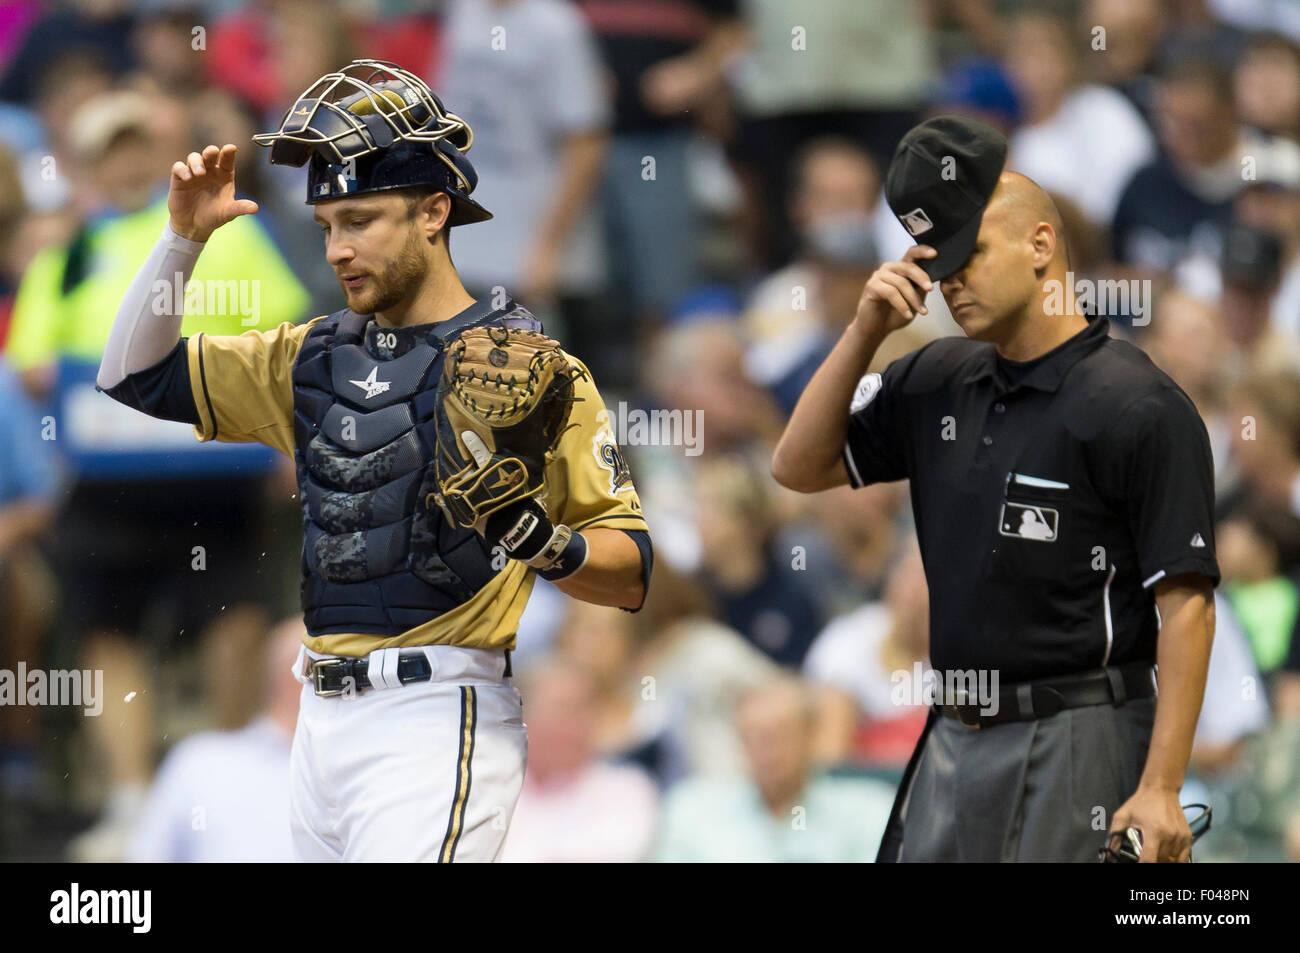 Milwaukee, WI, USA. 05th Aug, 2015. Milwaukee Brewers catcher Jonathan Lucroy #20 and Home Plate Umpire Vic Carapazza during the Major League Baseball game between the Milwaukee Brewers and the San Diego Padres at Miller Park in Milwaukee, WI. John Fisher/CSM/Alamy Live News Stock Photo